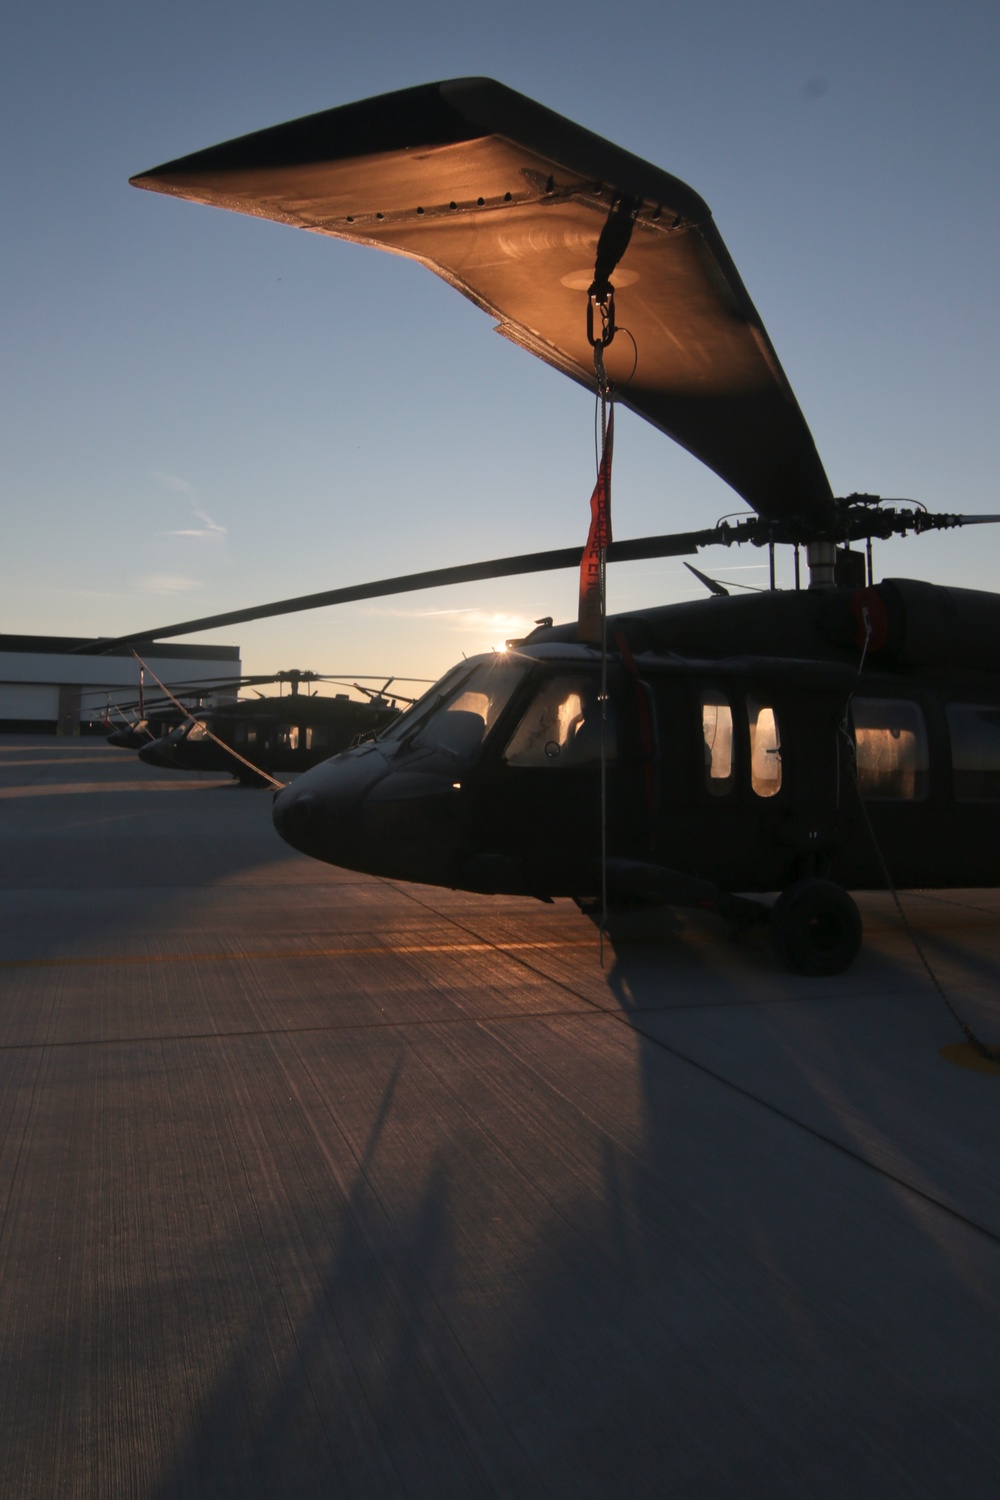 Army Aviation Support Facility